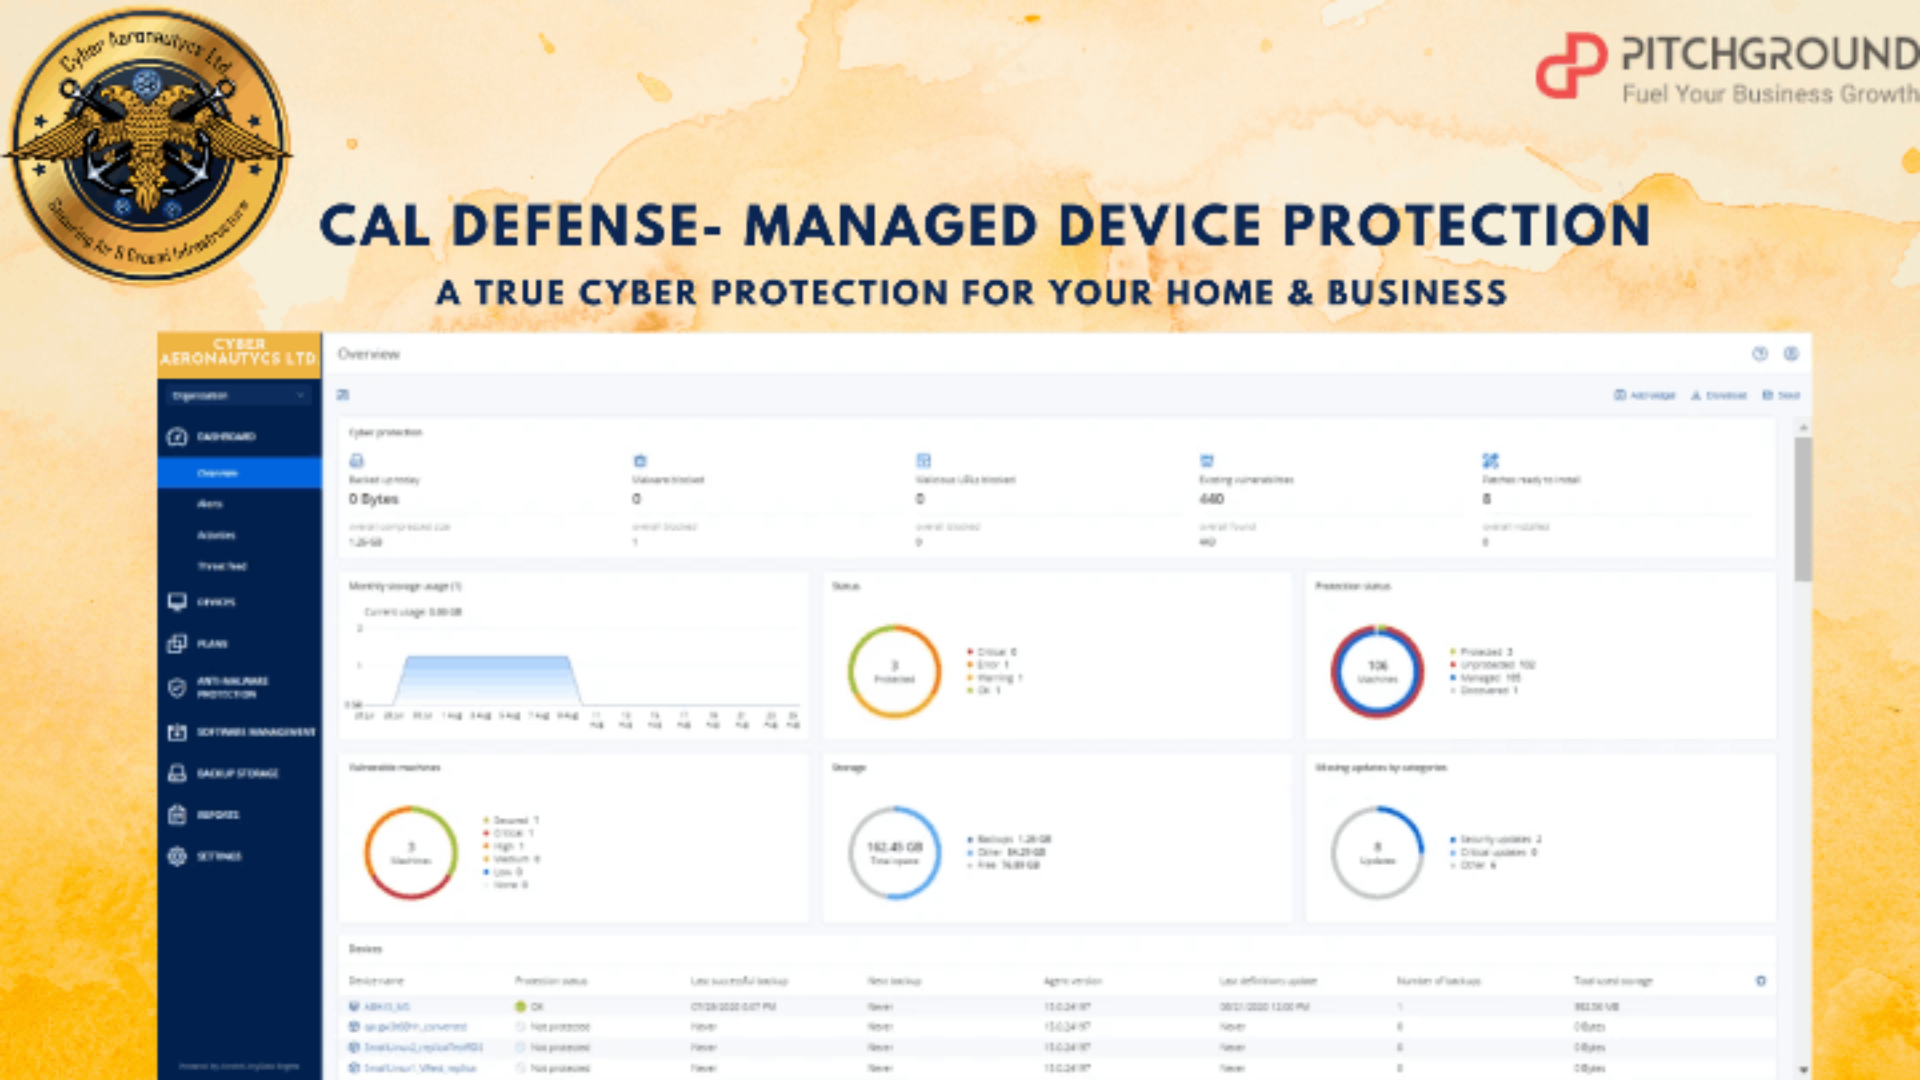 Lifetime Deal to CAL Defense- Managed Device Protection & Management: Plan A for $199